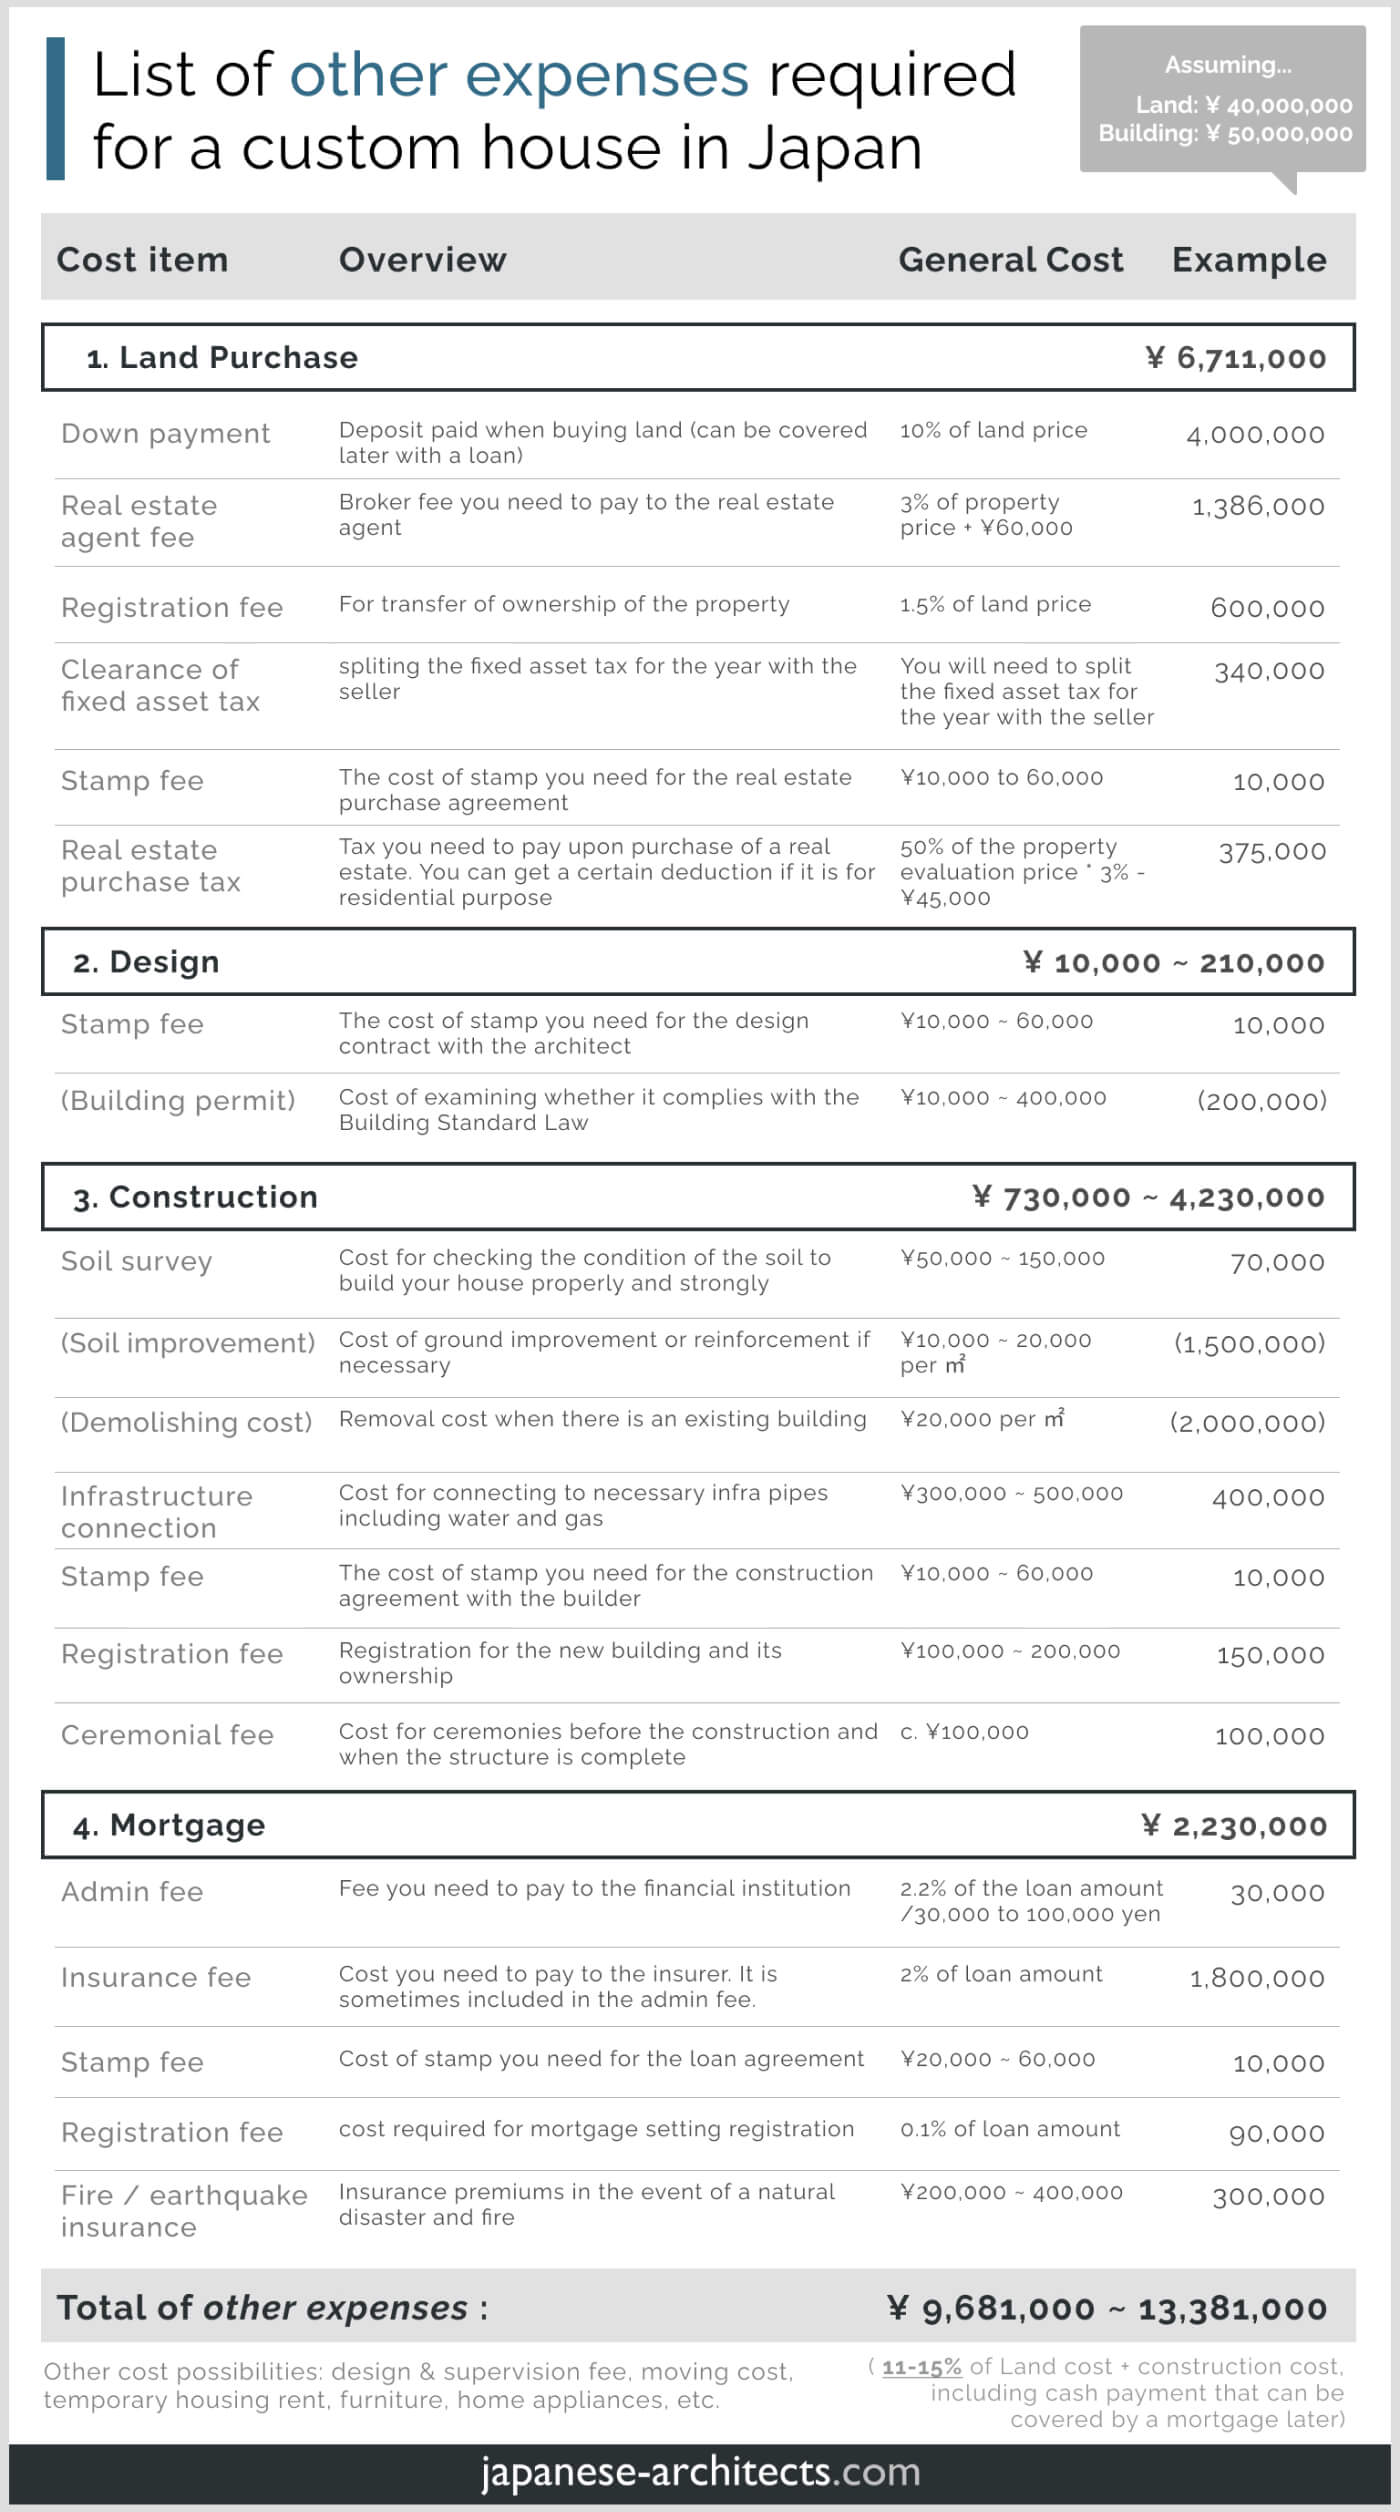 List of other expenses required for a custom house in Japan